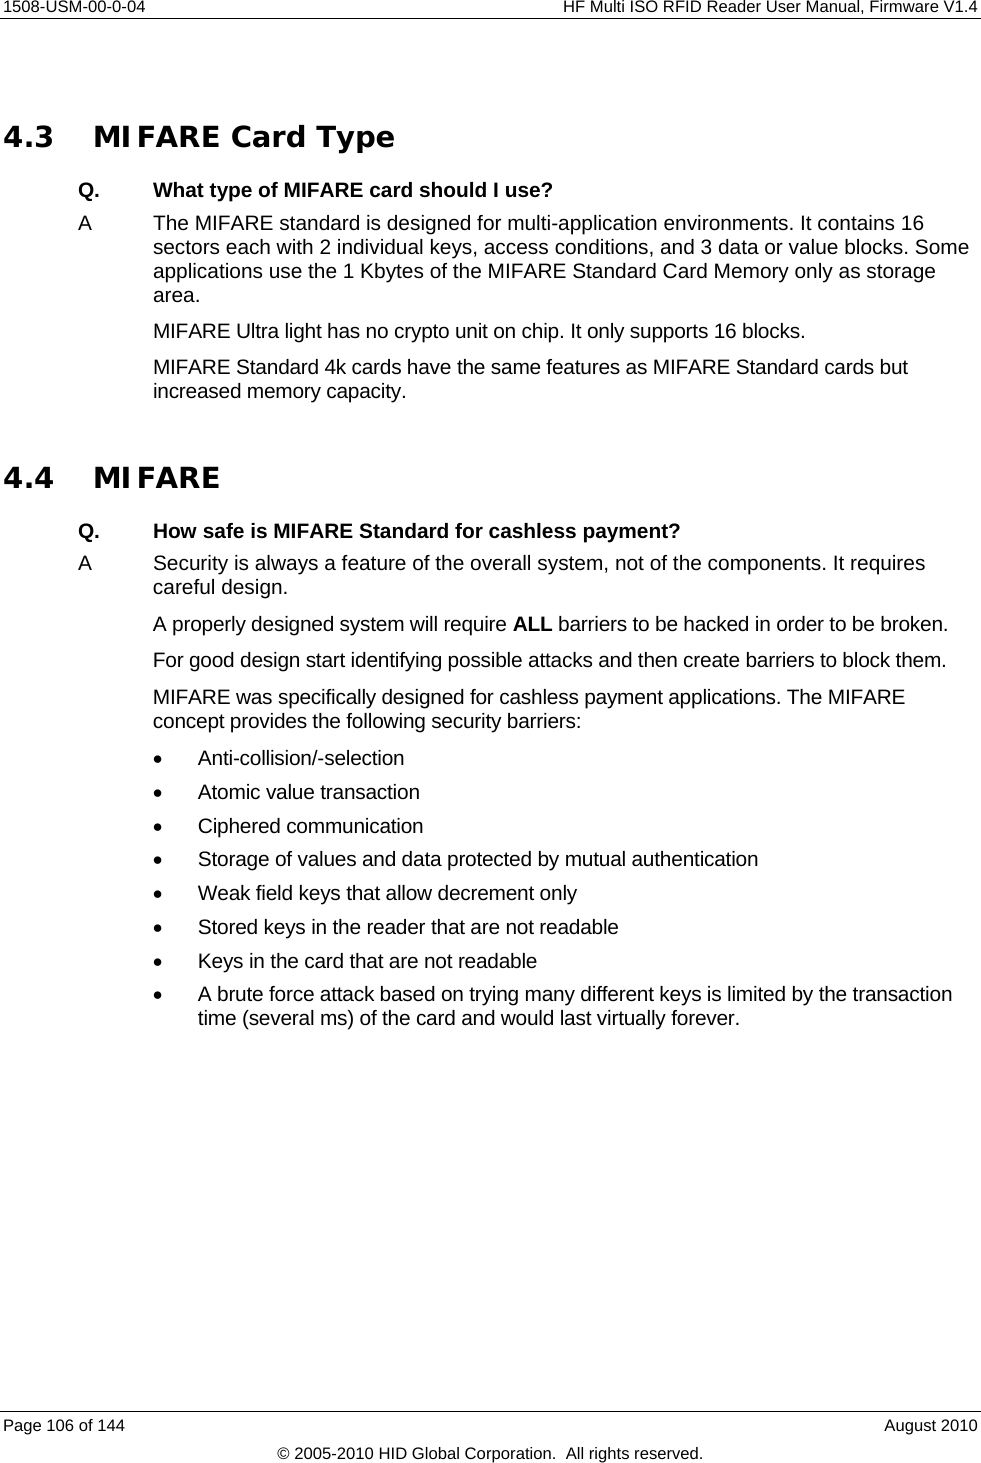     1508-USM-00-0-04    HF Multi ISO RFID Reader User Manual, Firmware V1.4  4.3 MIFARE Card Type Q.  What type of MIFARE card should I use? A  The MIFARE standard is designed for multi-application environments. It contains 16 sectors each with 2 individual keys, access conditions, and 3 data or value blocks. Some applications use the 1 Kbytes of the MIFARE Standard Card Memory only as storage area. MIFARE Ultra light has no crypto unit on chip. It only supports 16 blocks. MIFARE Standard 4k cards have the same features as MIFARE Standard cards but increased memory capacity.  4.4 MIFARE Q.  How safe is MIFARE Standard for cashless payment? A  Security is always a feature of the overall system, not of the components. It requires careful design.  A properly designed system will require ALL barriers to be hacked in order to be broken. For good design start identifying possible attacks and then create barriers to block them. MIFARE was specifically designed for cashless payment applications. The MIFARE concept provides the following security barriers:   Anti-collision/-selection  Atomic value transaction  Ciphered communication   Storage of values and data protected by mutual authentication   Weak field keys that allow decrement only   Stored keys in the reader that are not readable   Keys in the card that are not readable   A brute force attack based on trying many different keys is limited by the transaction time (several ms) of the card and would last virtually forever. Page 106 of 144    August 2010 © 2005-2010 HID Global Corporation.  All rights reserved. 